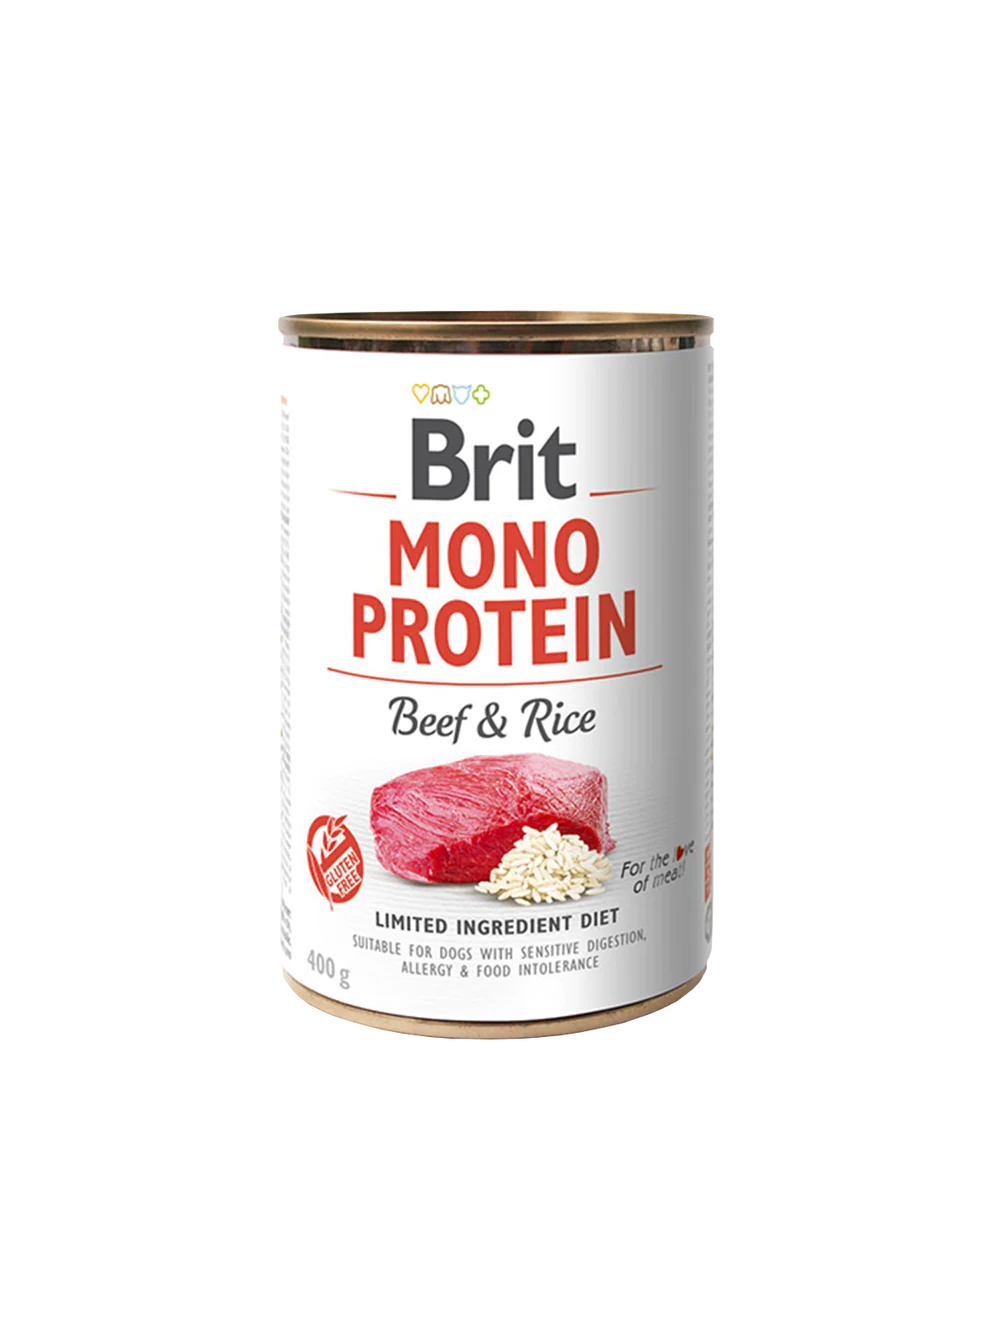 Brit Mono Protein Beef & Rice 6 pack of 400g